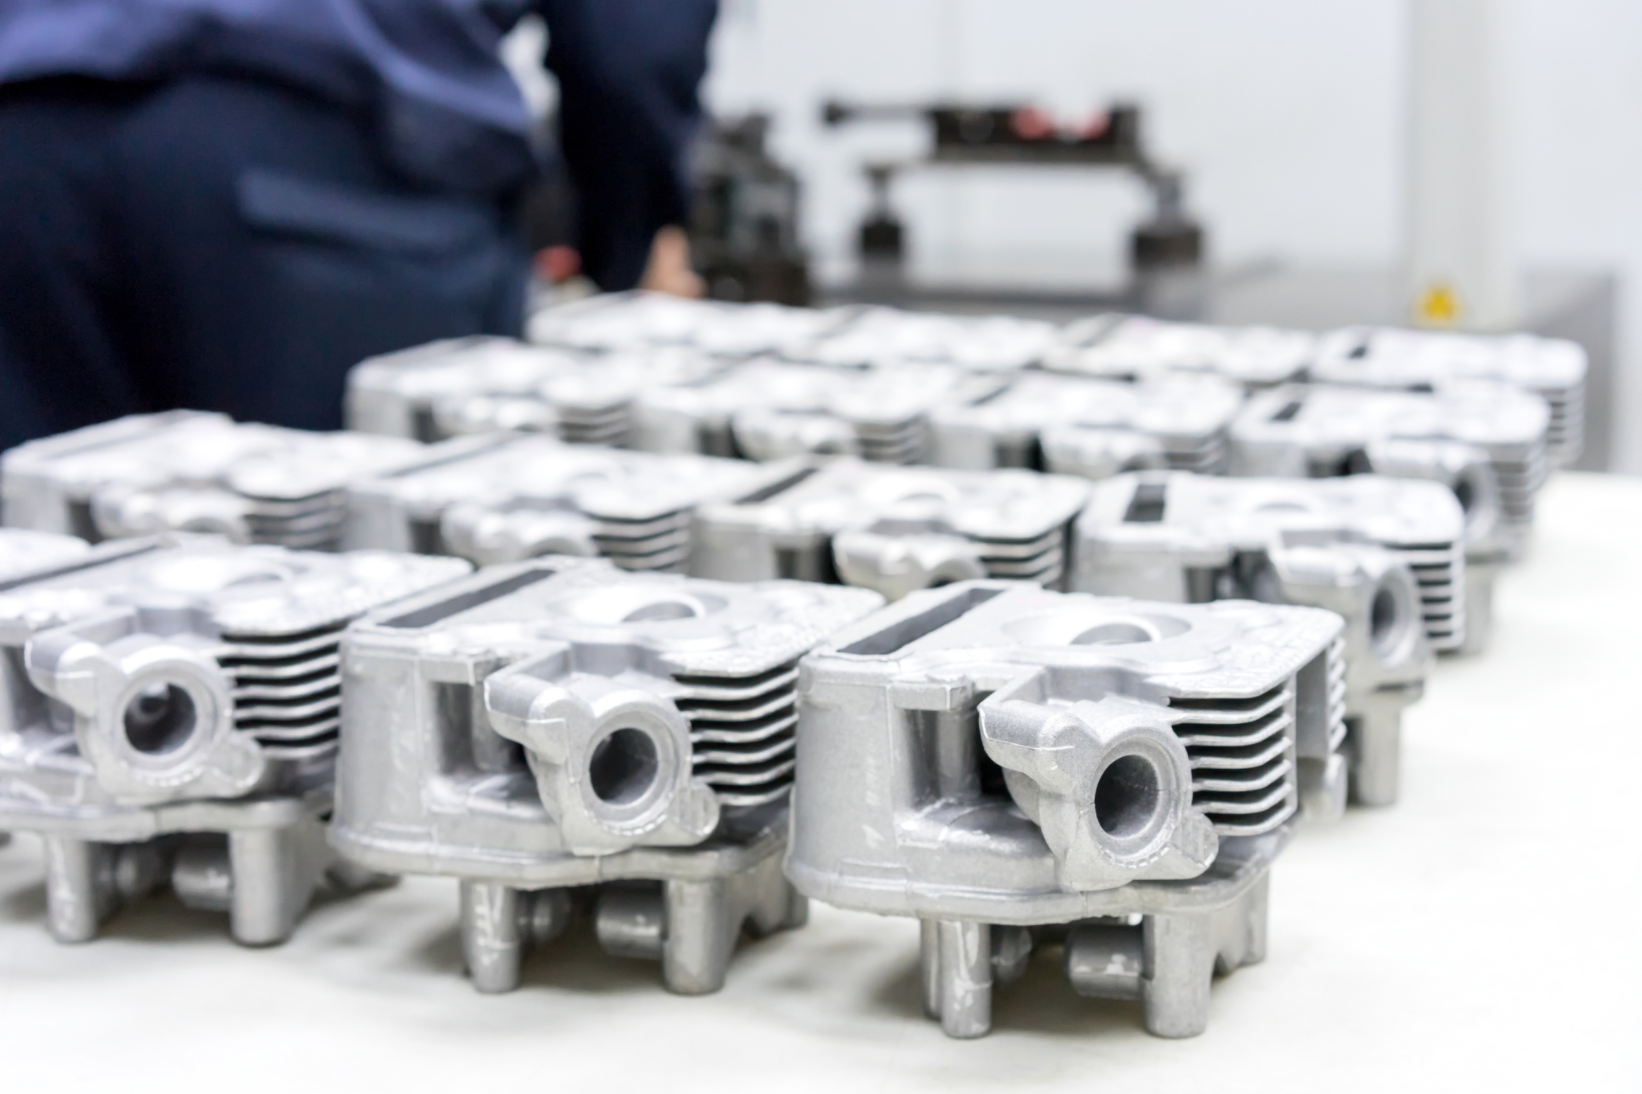 Parts like these aluminum cylinder heads can be 3D-printed in a fraction of the time it would take to machine or cast them.